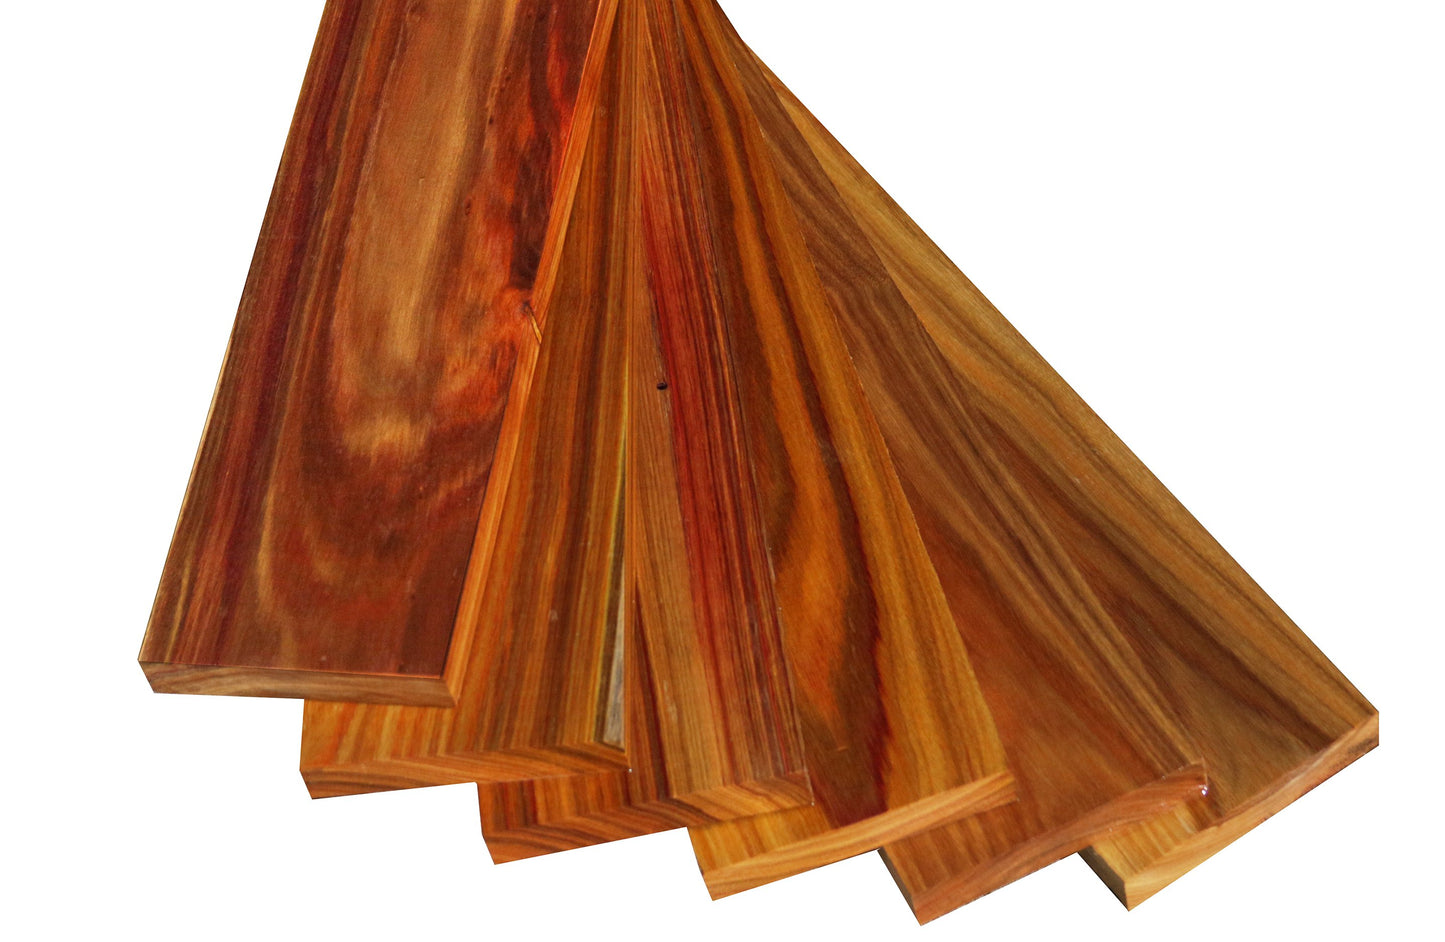 Canary Lumber (32" x 5" up to 5-3/8" x 13/16")